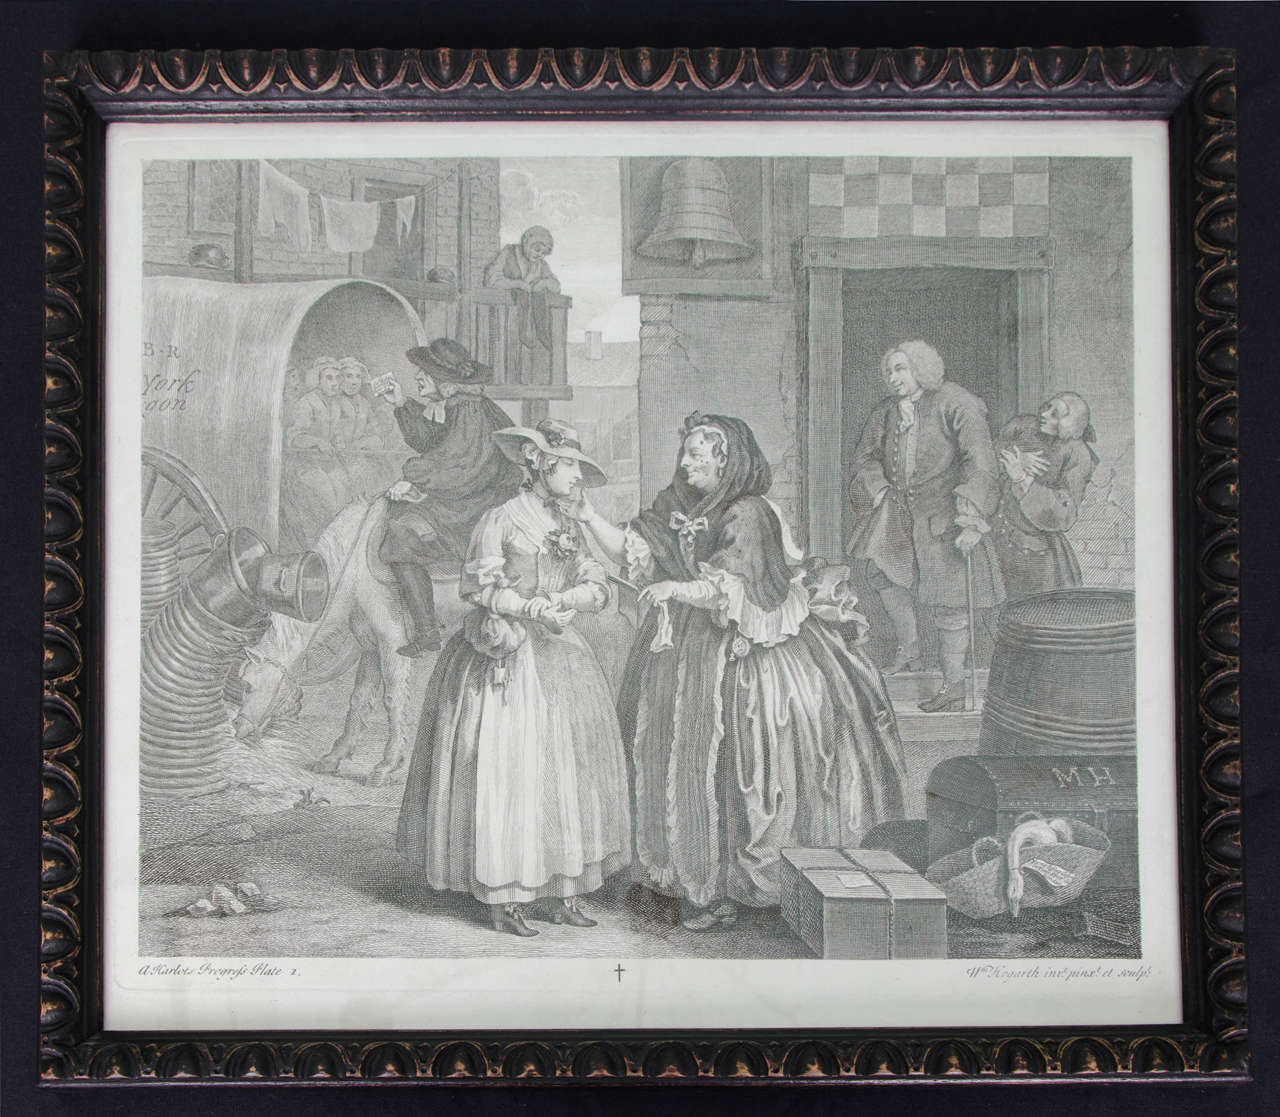 Complete set of William Hogarth's The harlot's Progress, 1732.
Painted and engraved by William Hogarth. This edition is the Heath edition of 1822.
Plate size: approx. 15 1/2 x 12 1/2 inches. Framed in egg and dart wood carved frames.
Condition: